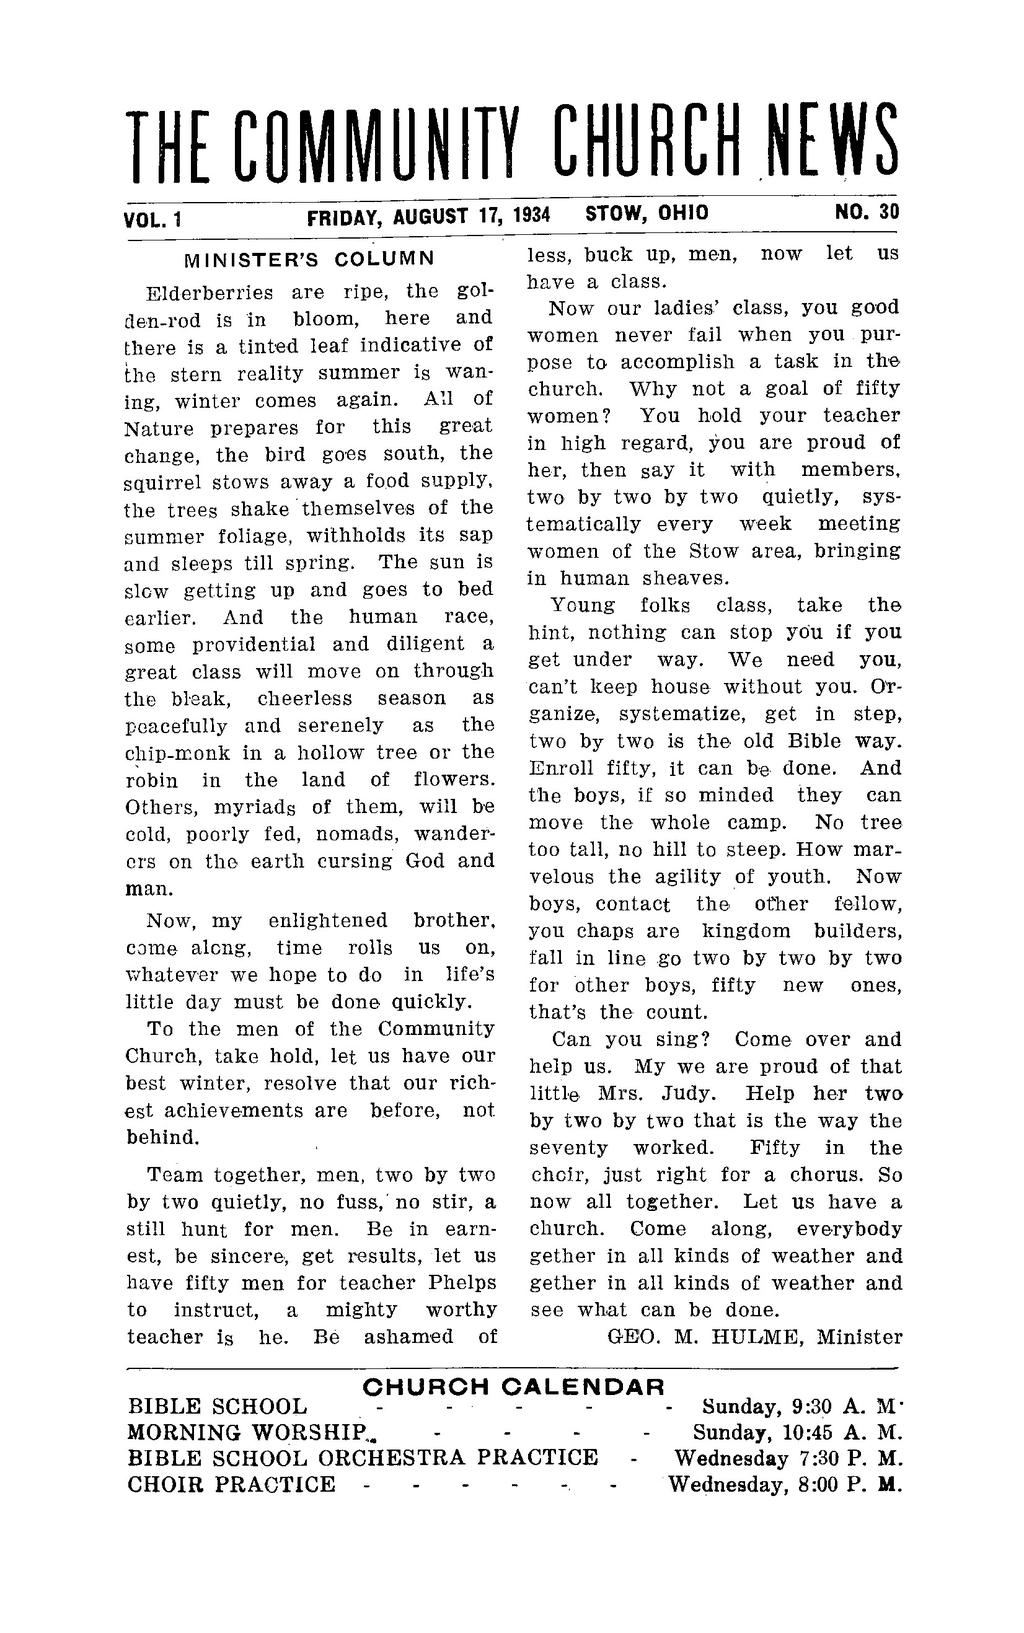 THE COMMUNITY CHURCH NEWS VOL. 1 FRIDAY, AUGUST 17, 1934 STOW, OHIO NO.